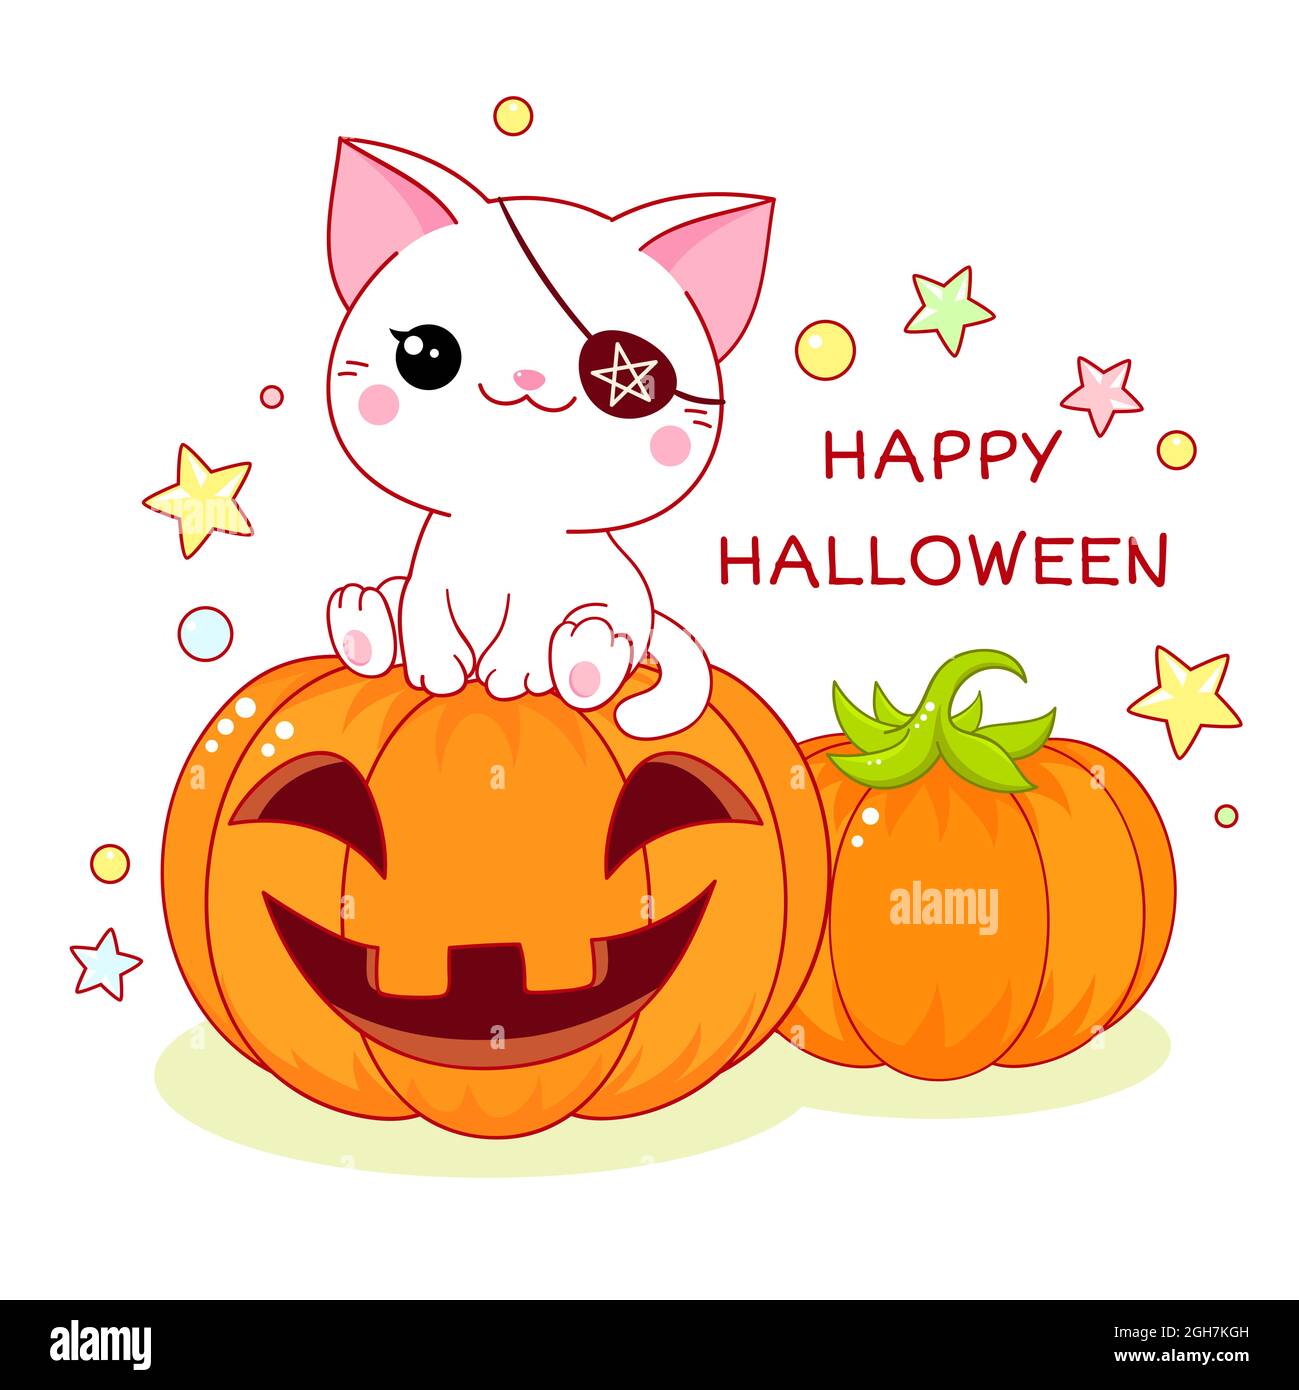 Happy Halloween. Greeting Halloween card with kawaii cat with eye patche sitting on a pumpkin. Vector illustration EPS8 Stock Vector